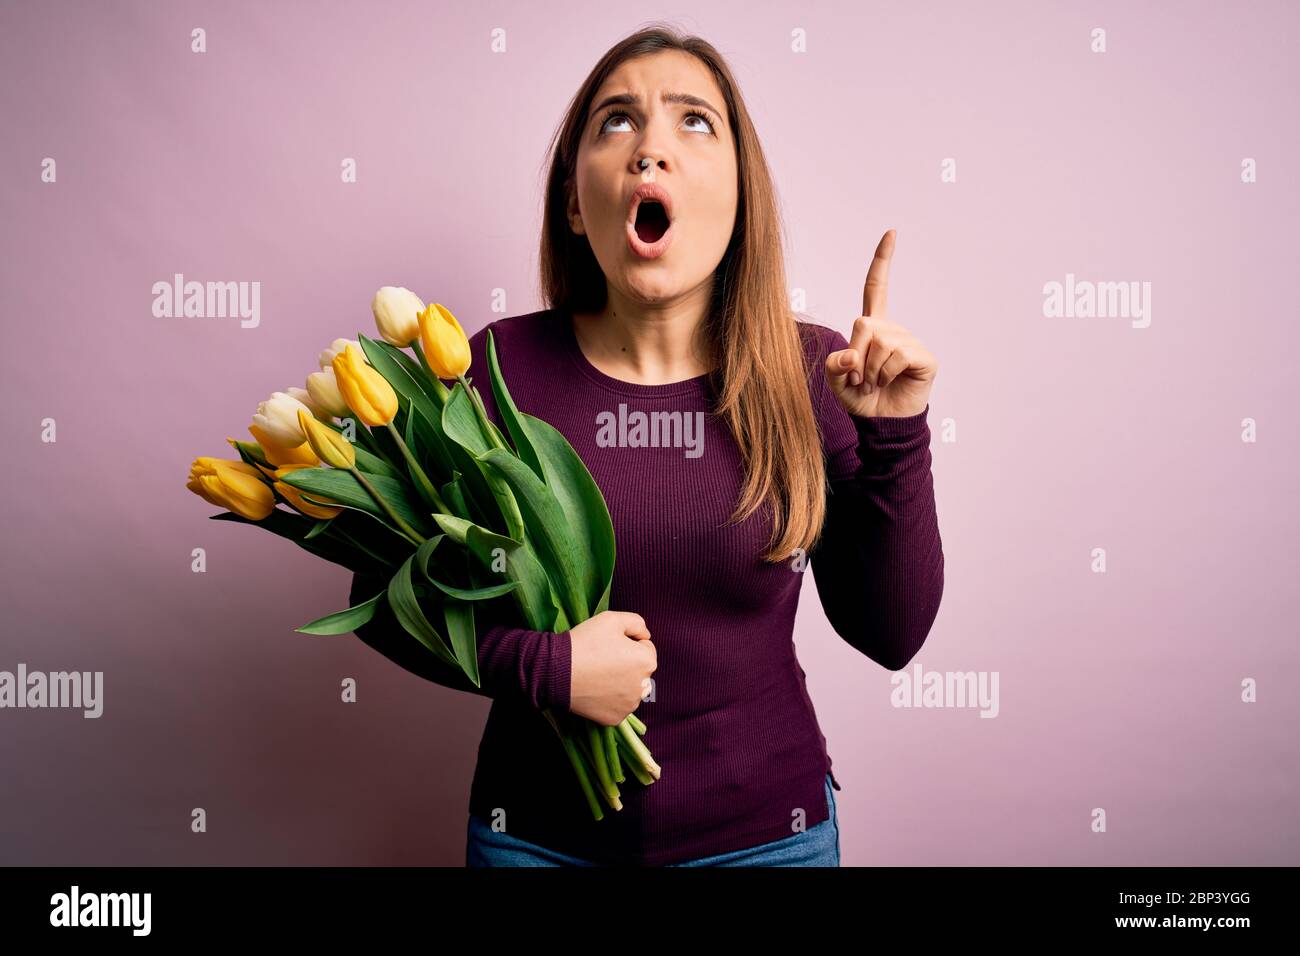 Young blonde woman holding romantic bouquet of yellow tulips flowers over pink background amazed and surprised looking up and pointing with fingers an Stock Photo